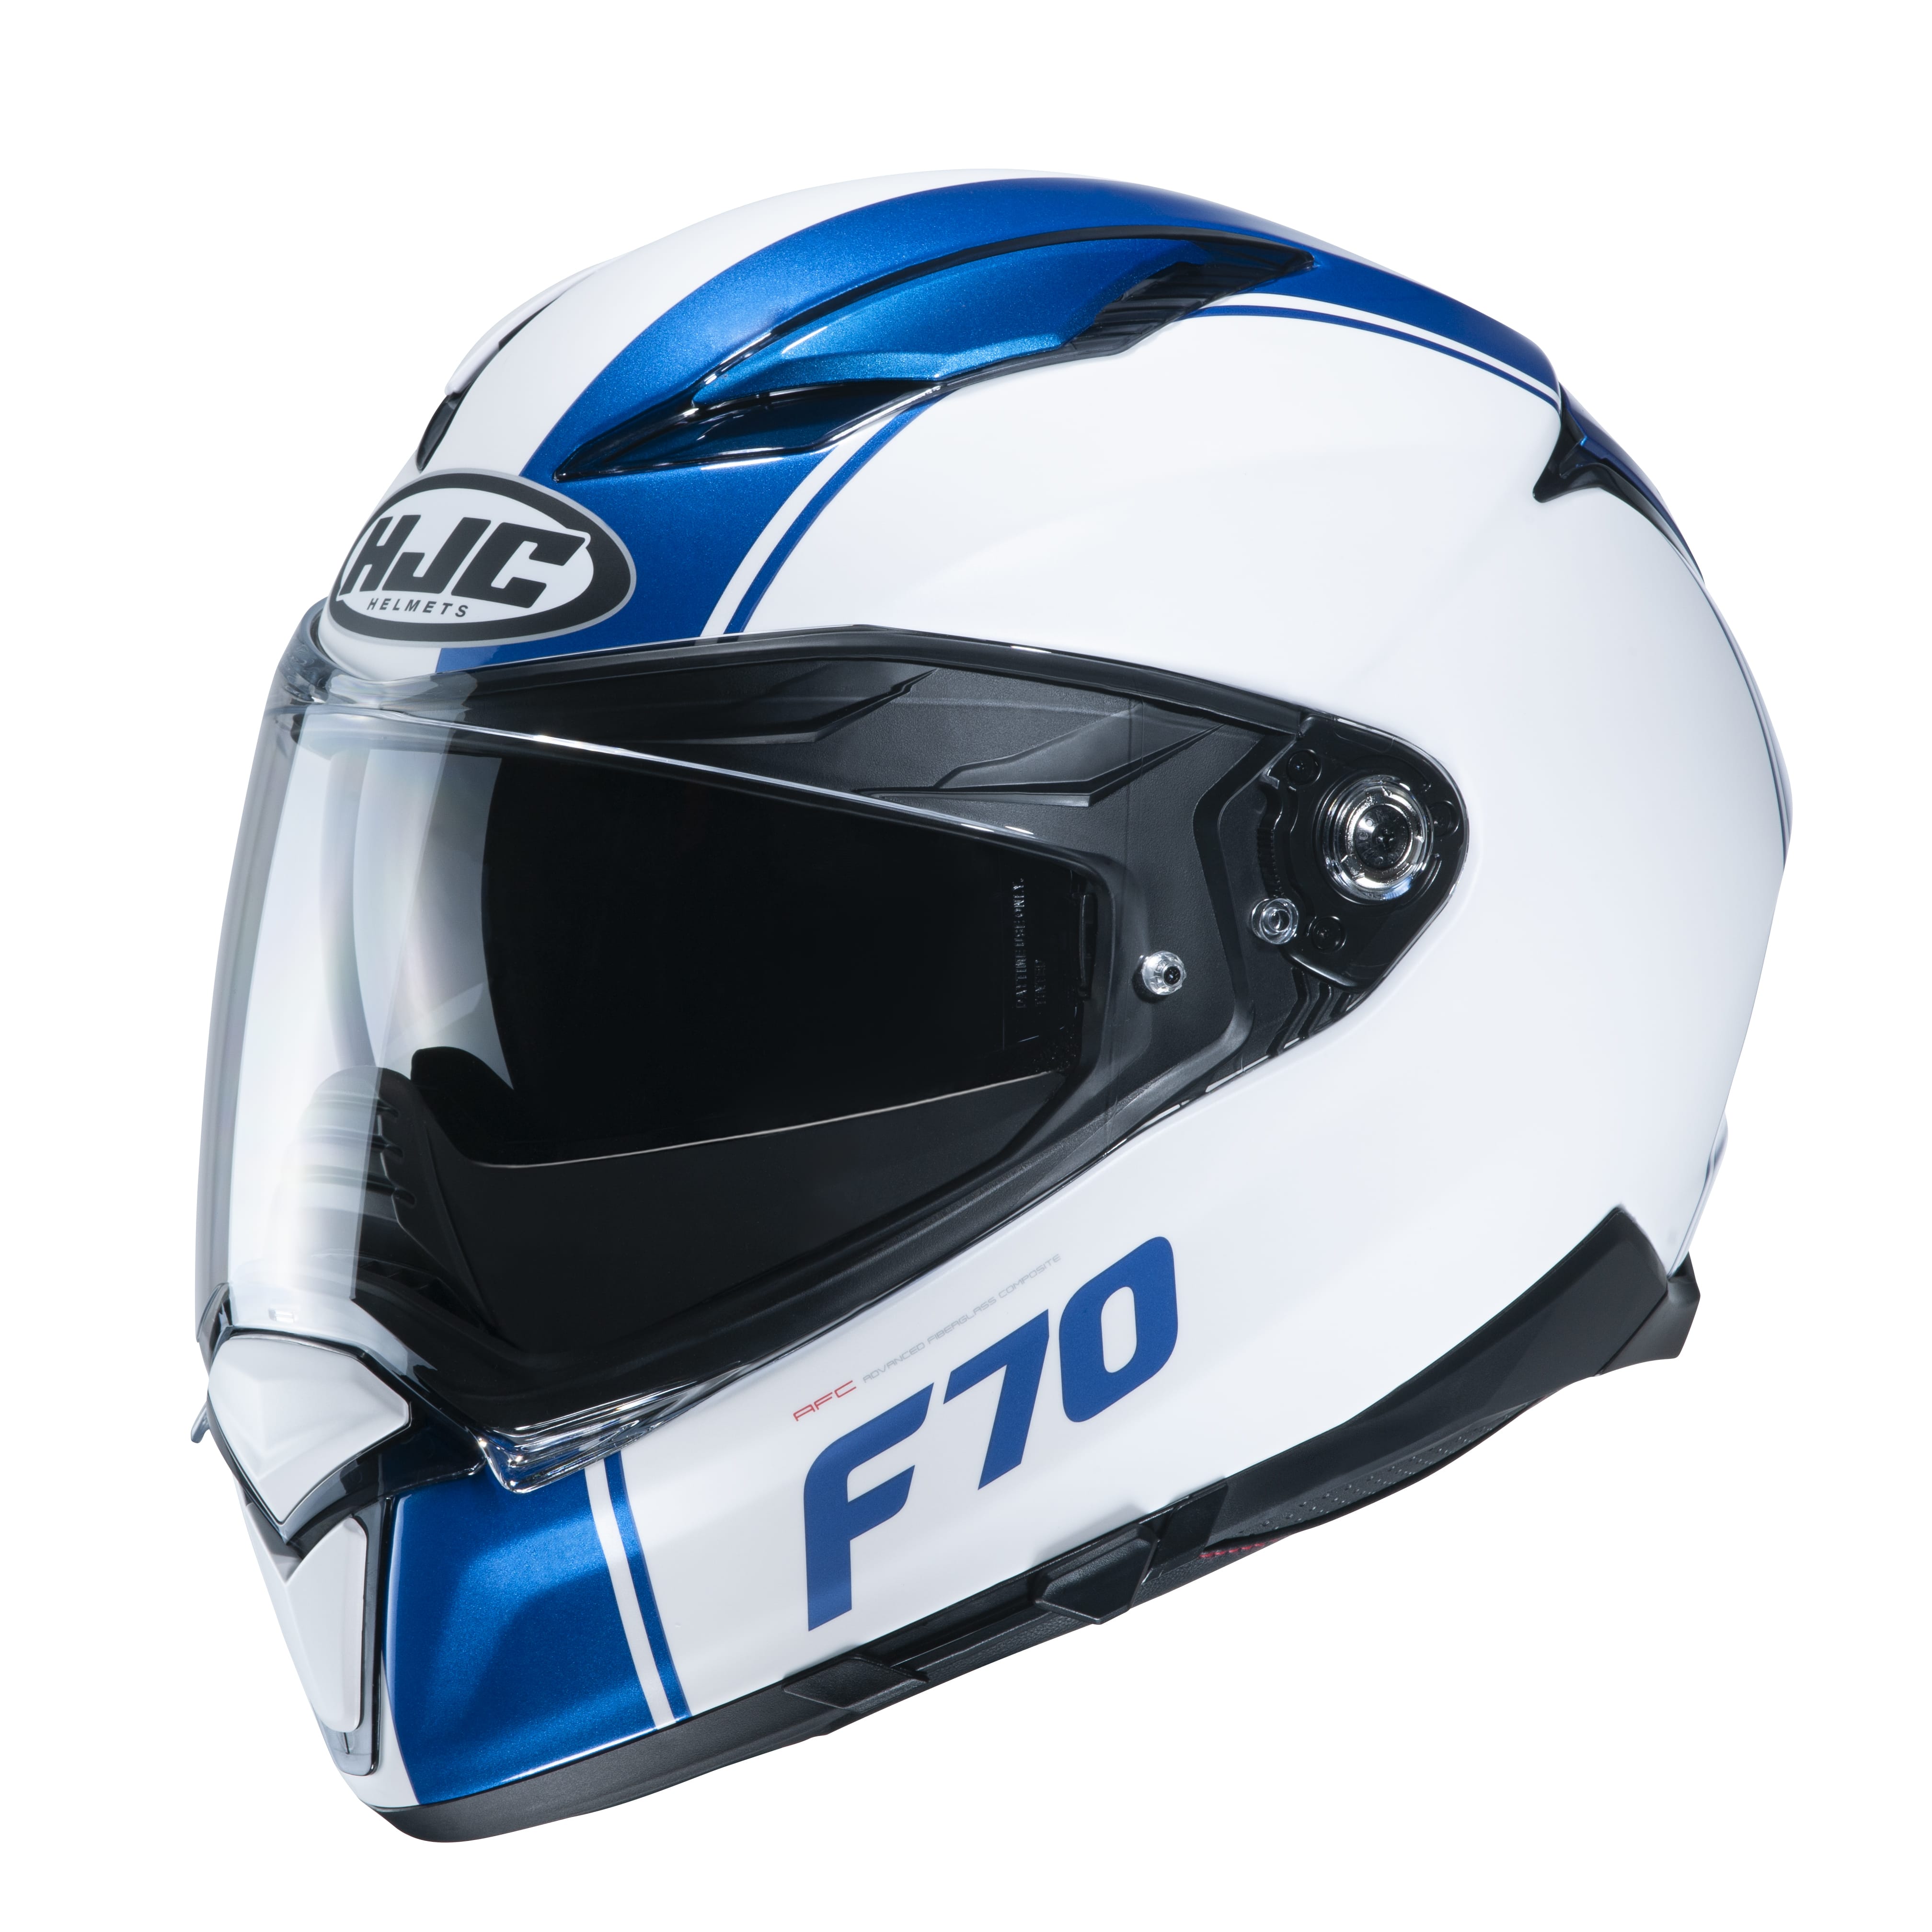 #HJC #F70 - New sport touring helmet
- also in the app Motorcycle News